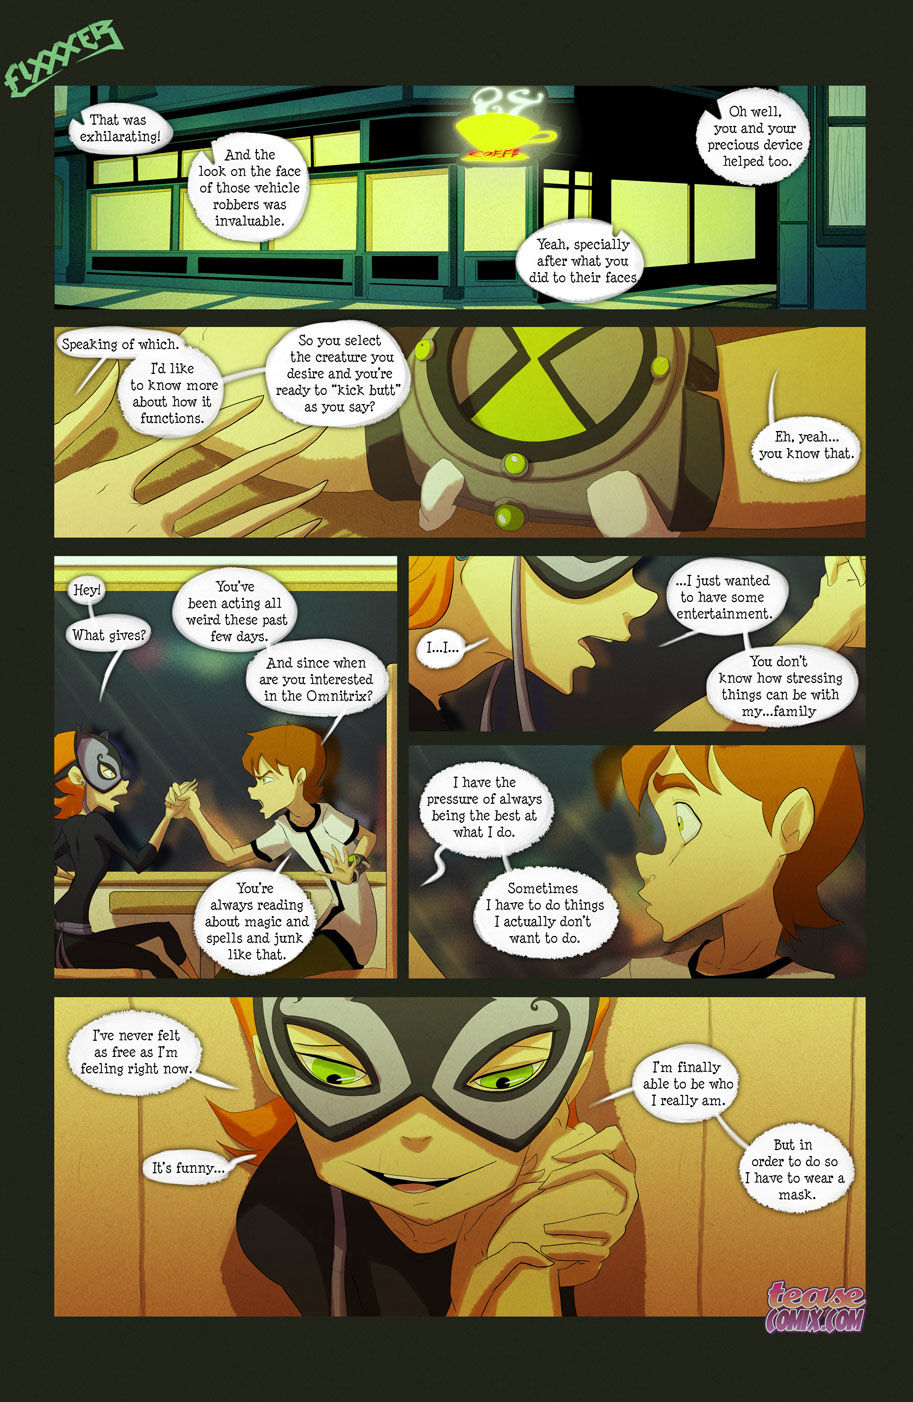 Fixxxer - The witch with no name, Ben 10 page 16